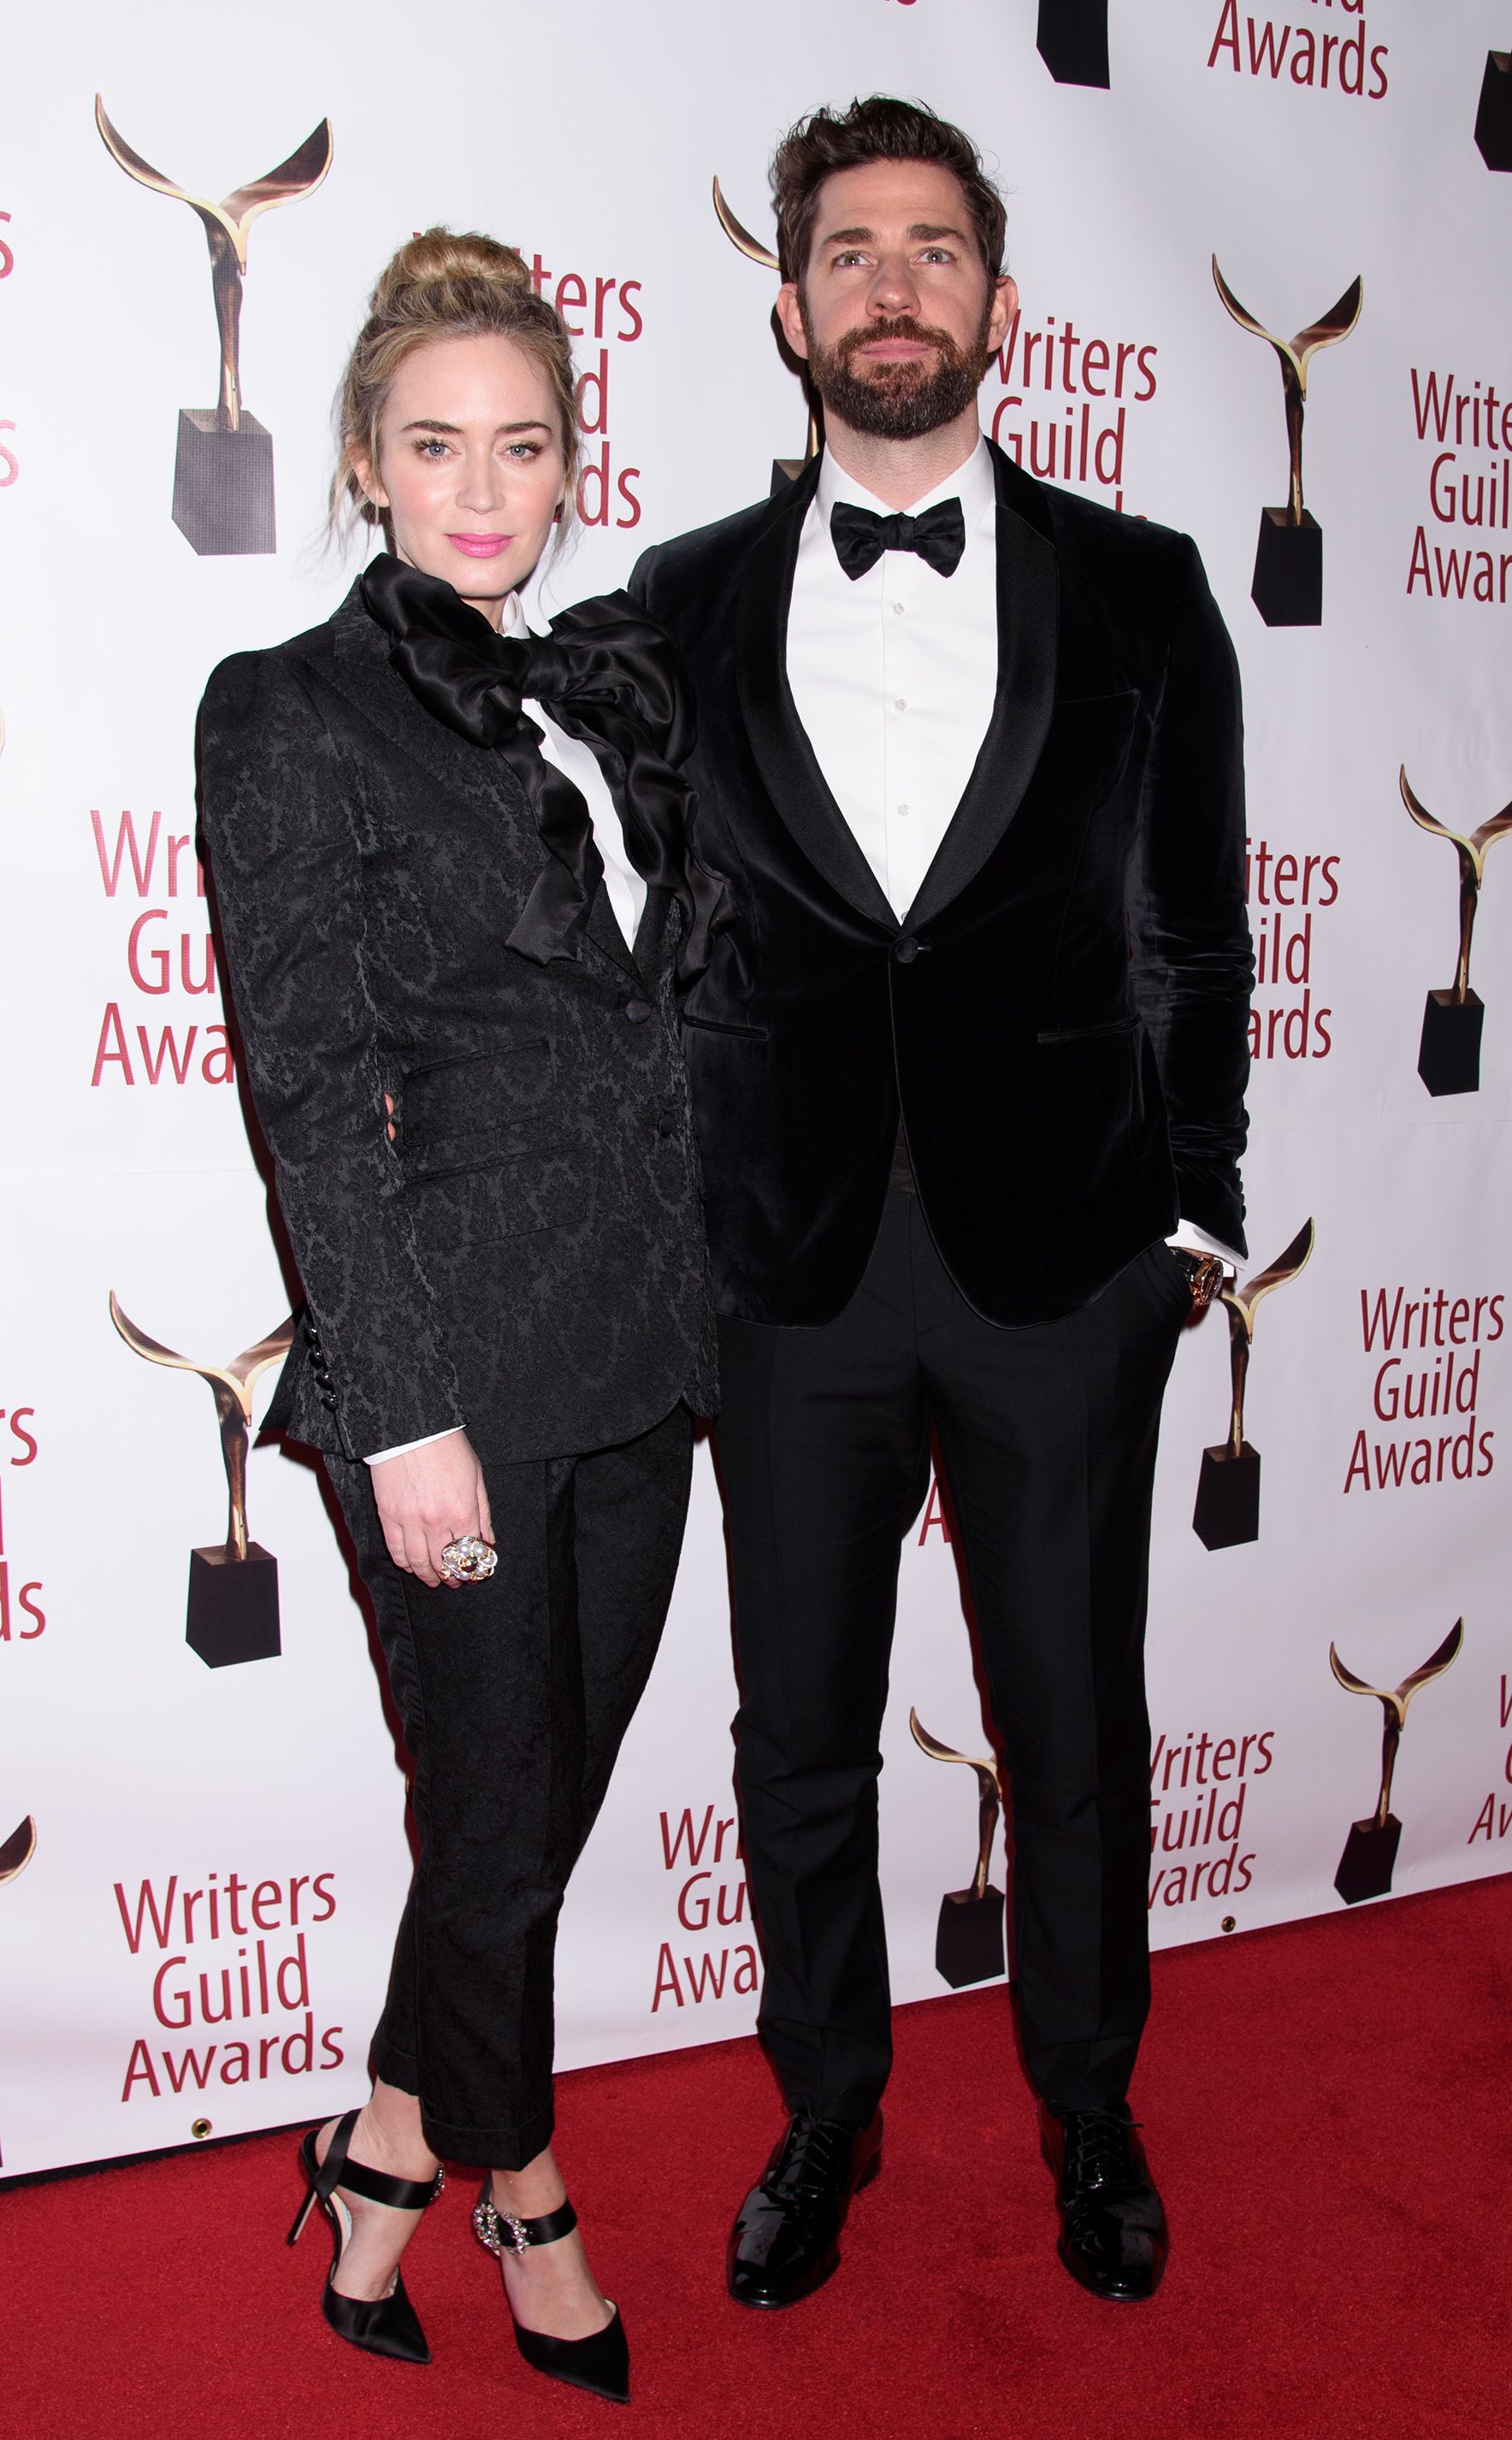 2019-02-17-71st-Annual-Writers-Guild-Awards-121.jpg